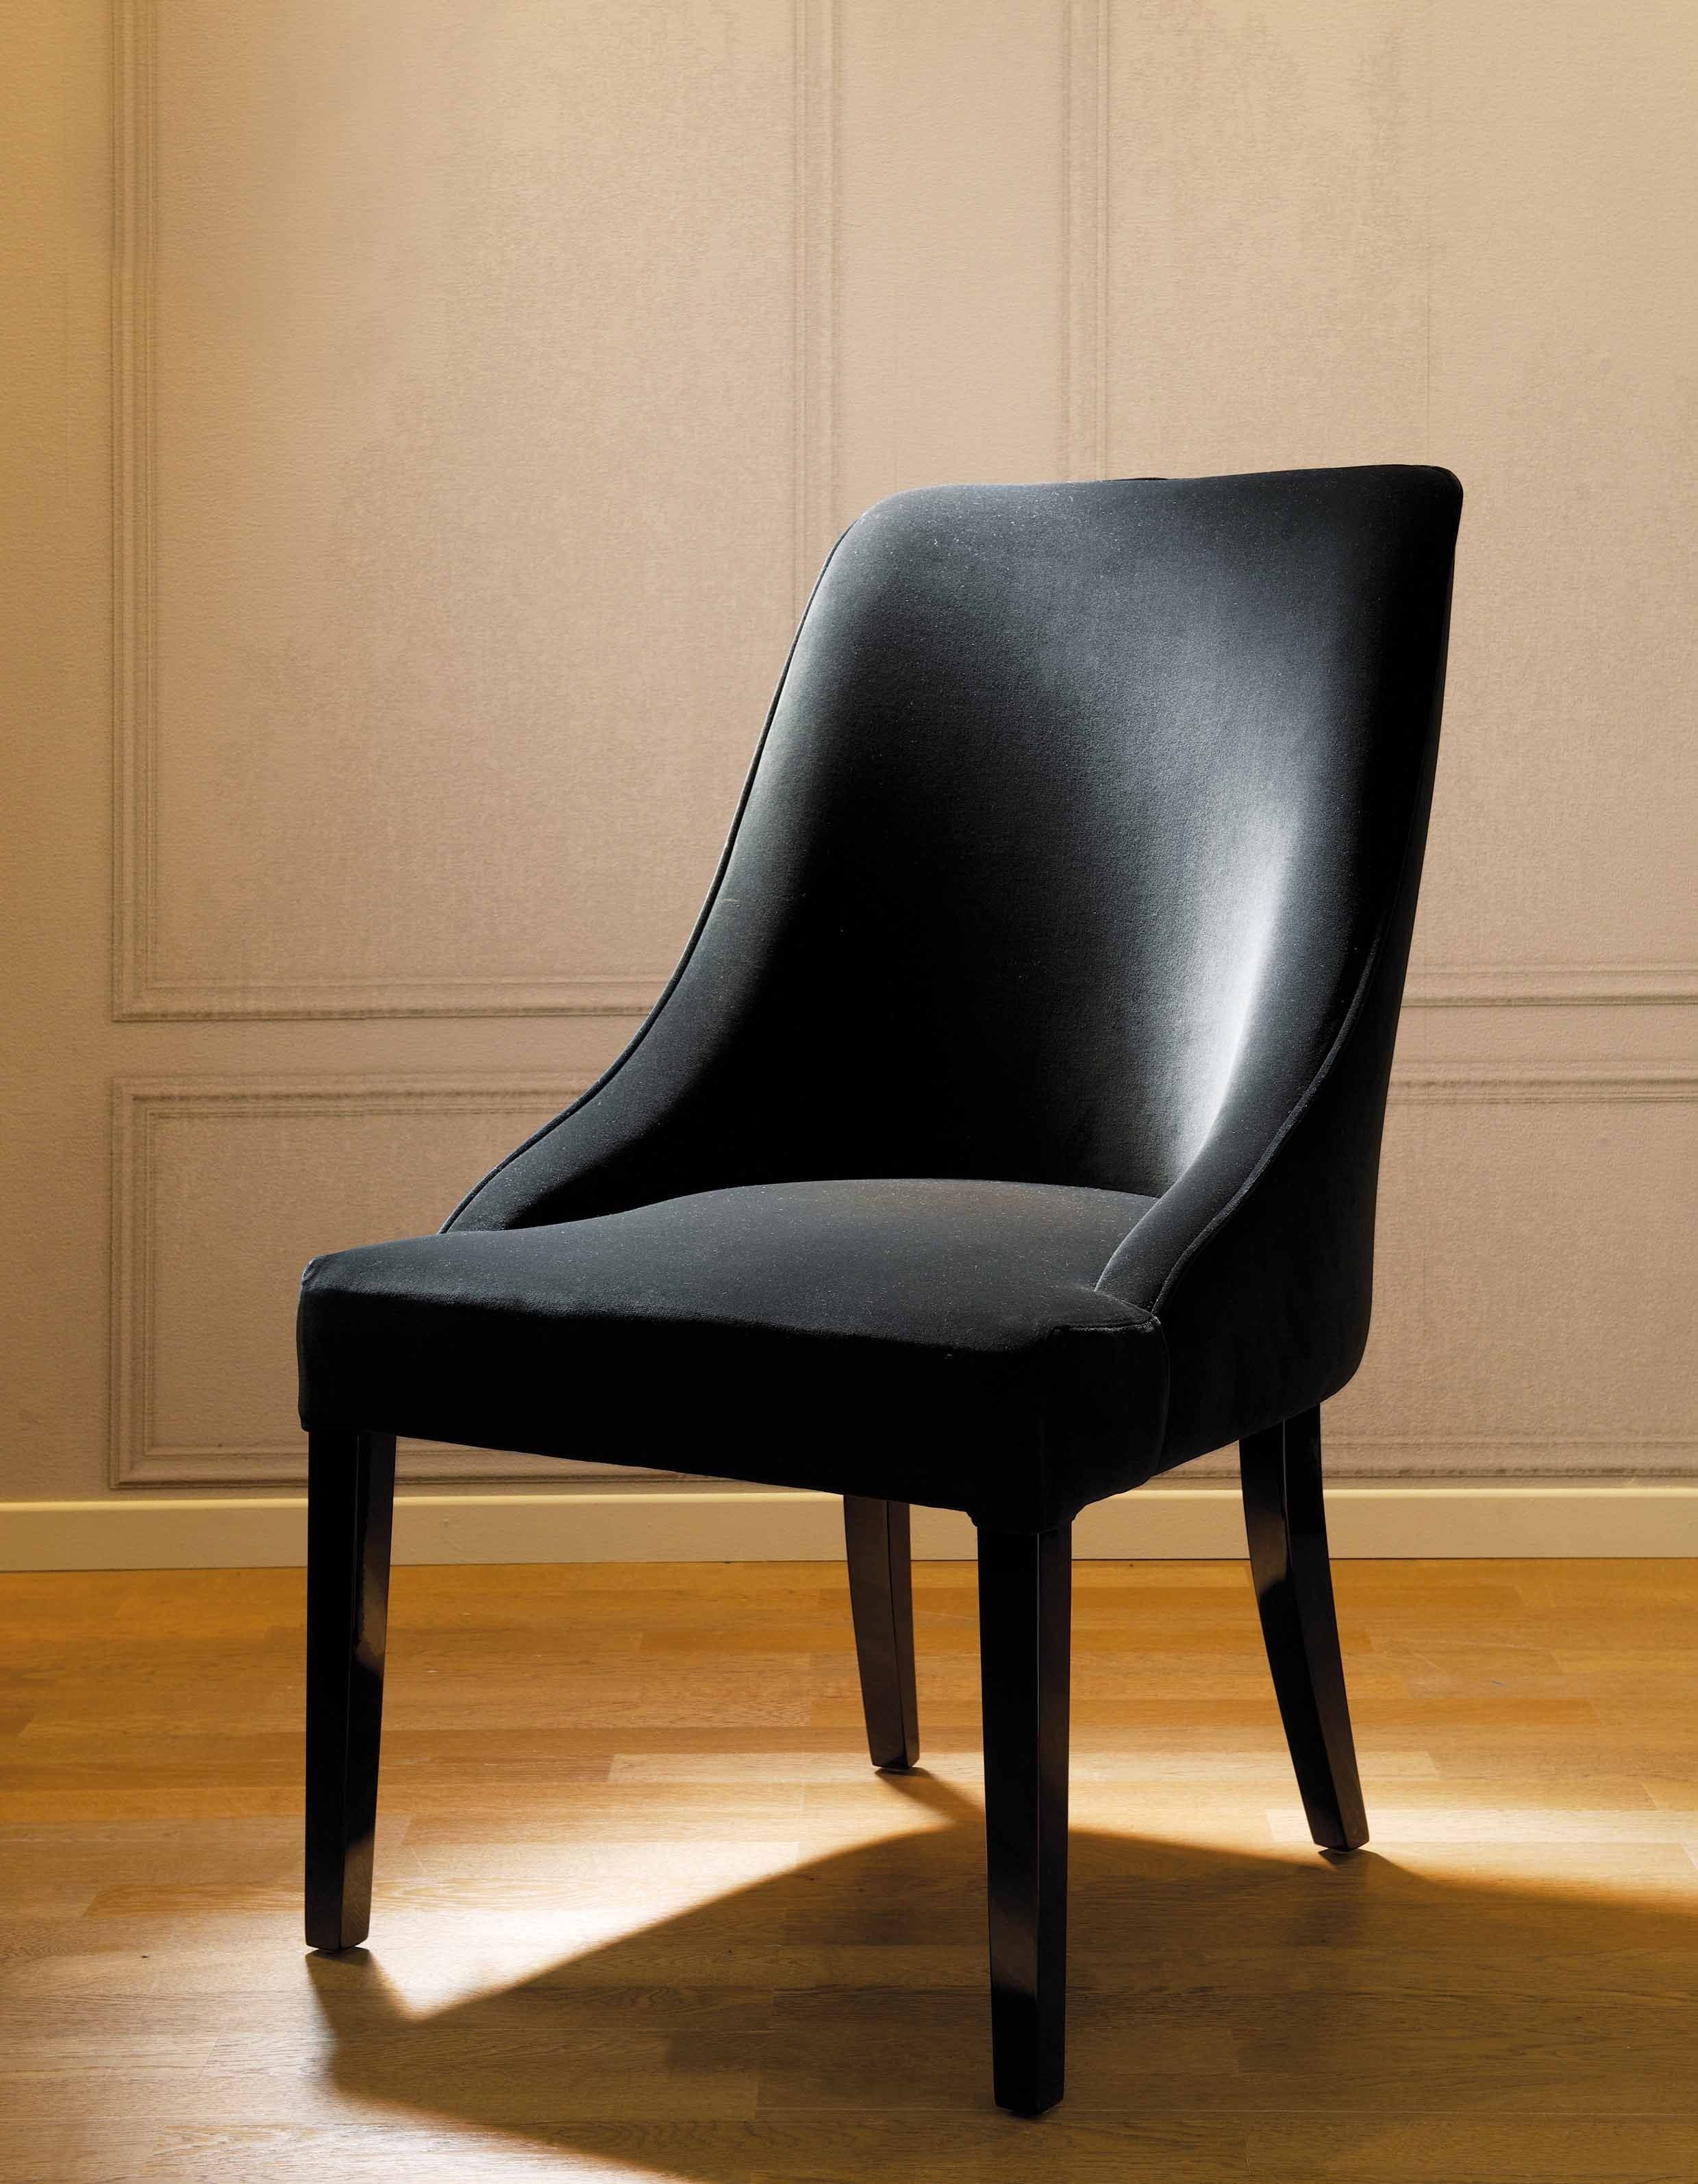 Dom Side Chairs Regarding Most Current Dom Edizioni: Grace Dinner Chair Luxury Furniture, Luxury Living (View 1 of 20)